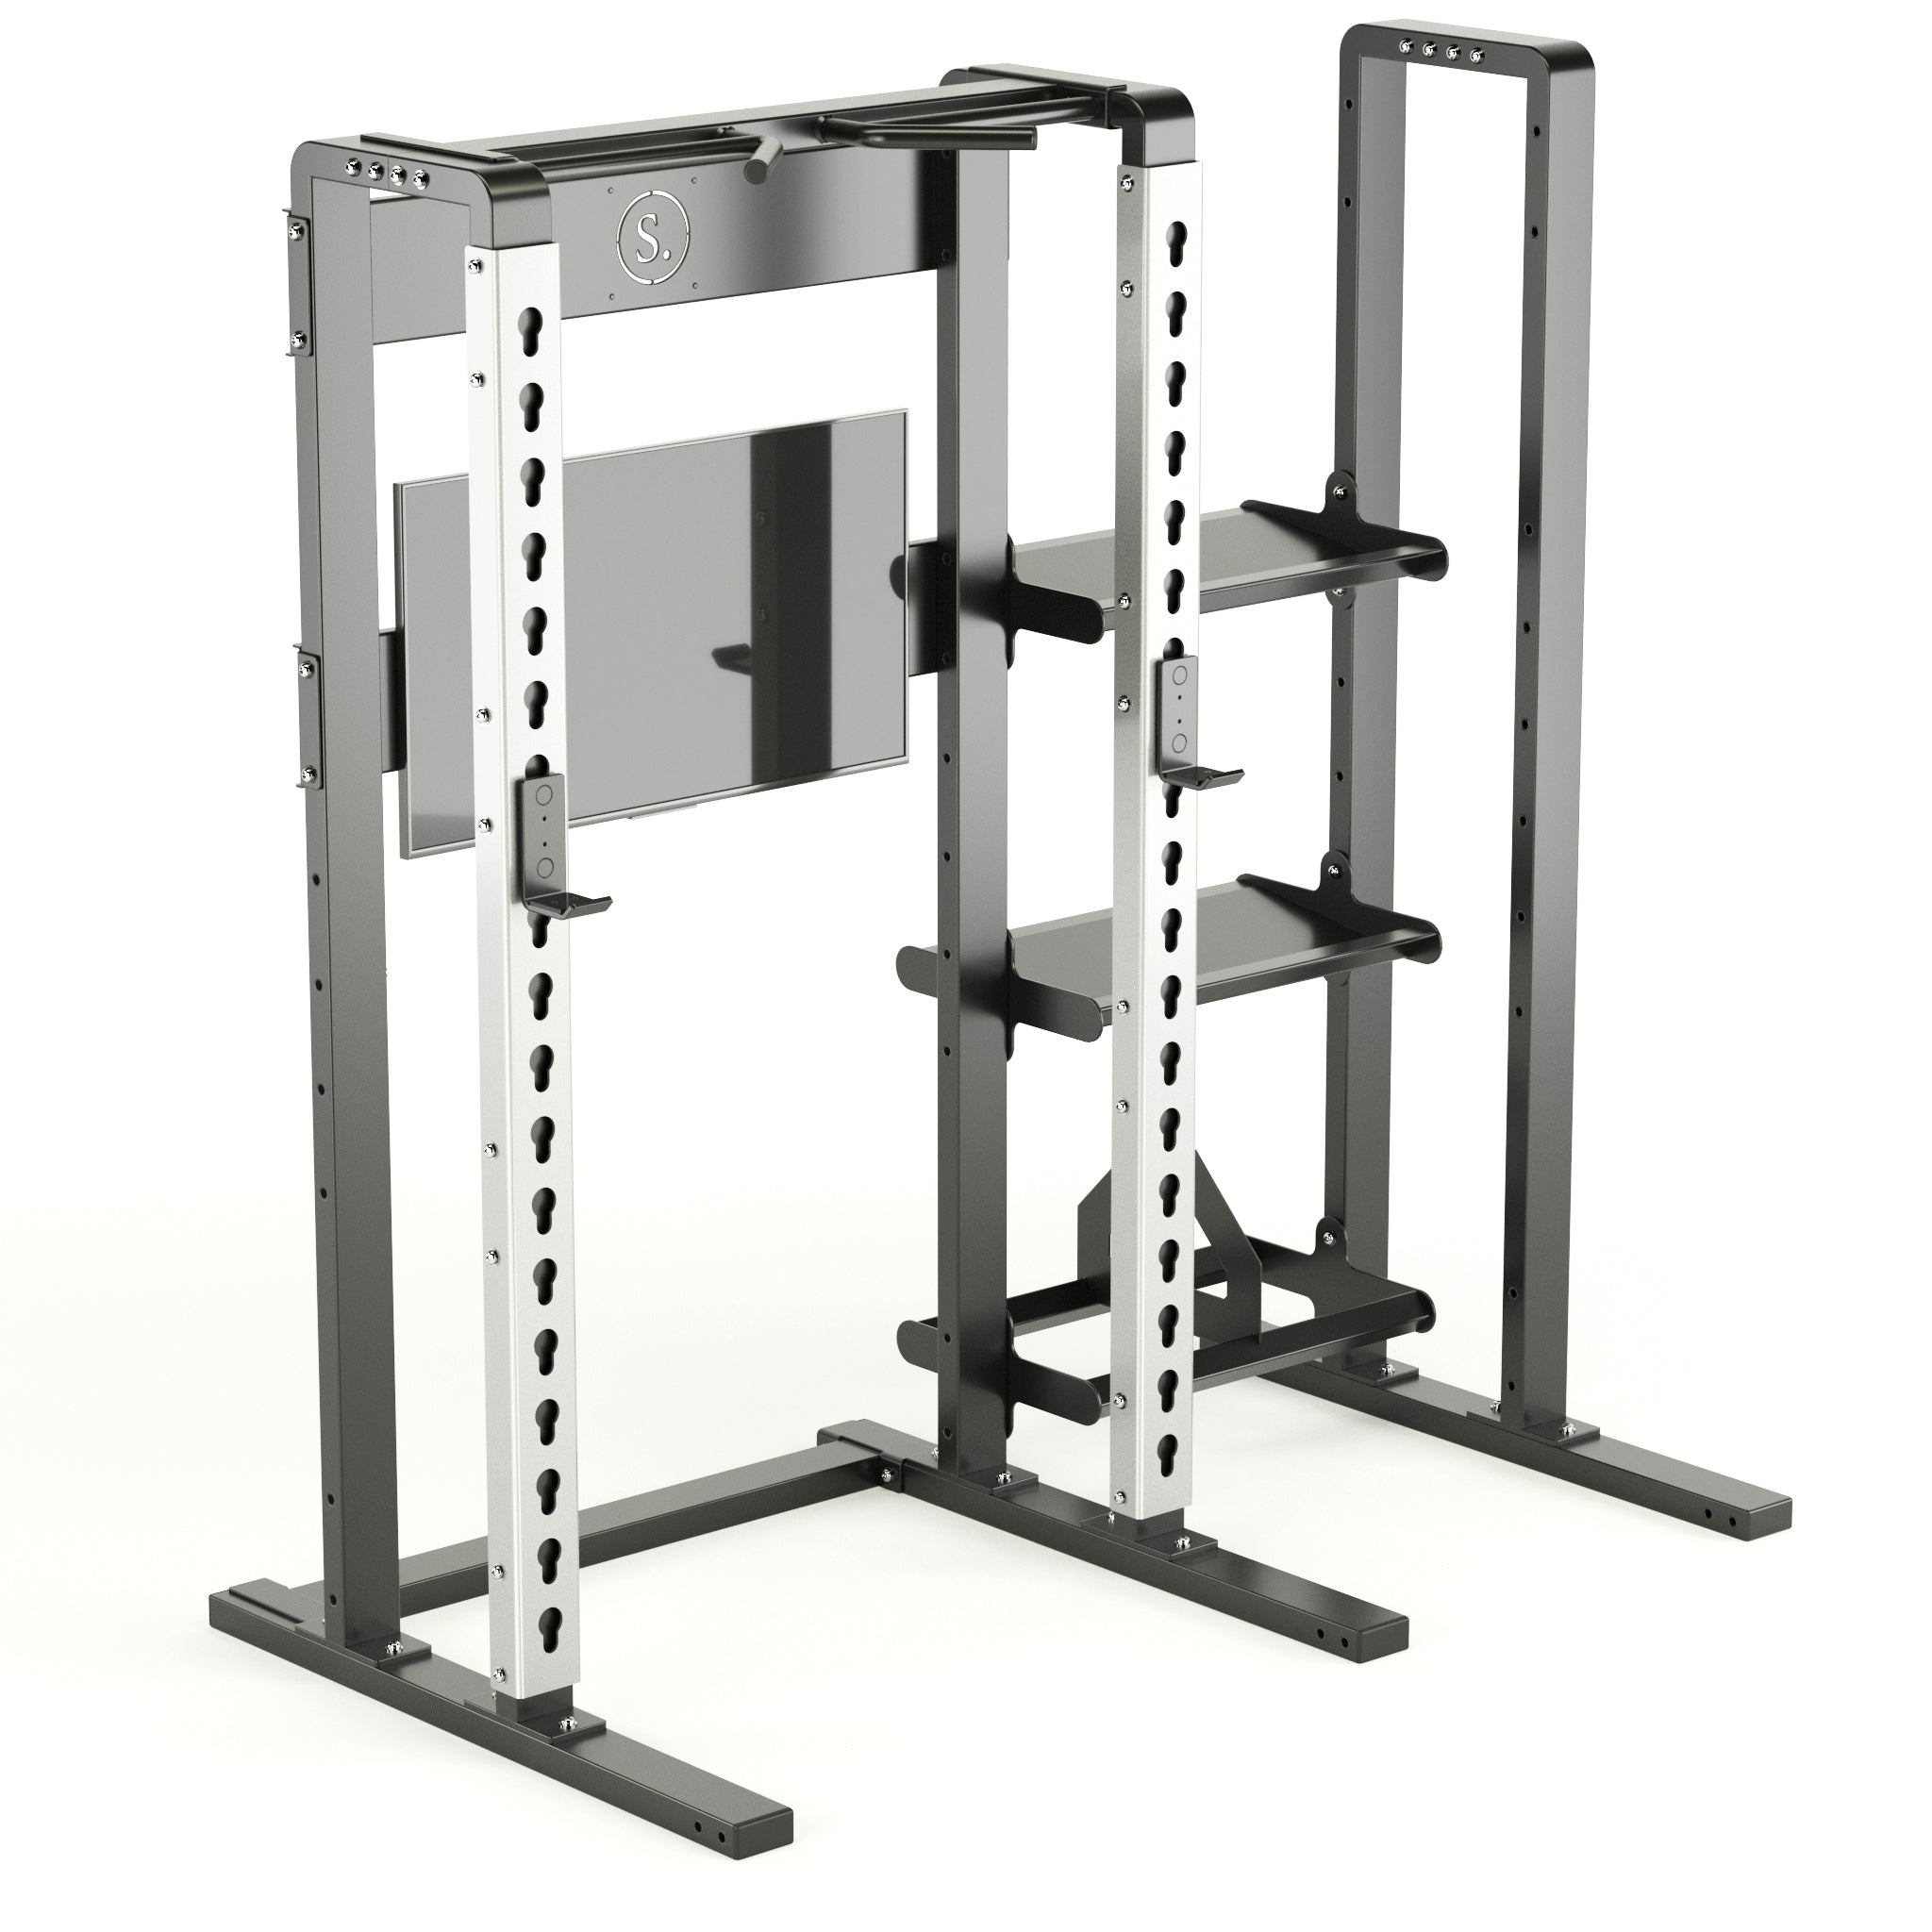 Solo Half Rack Plus with compact storage in silver